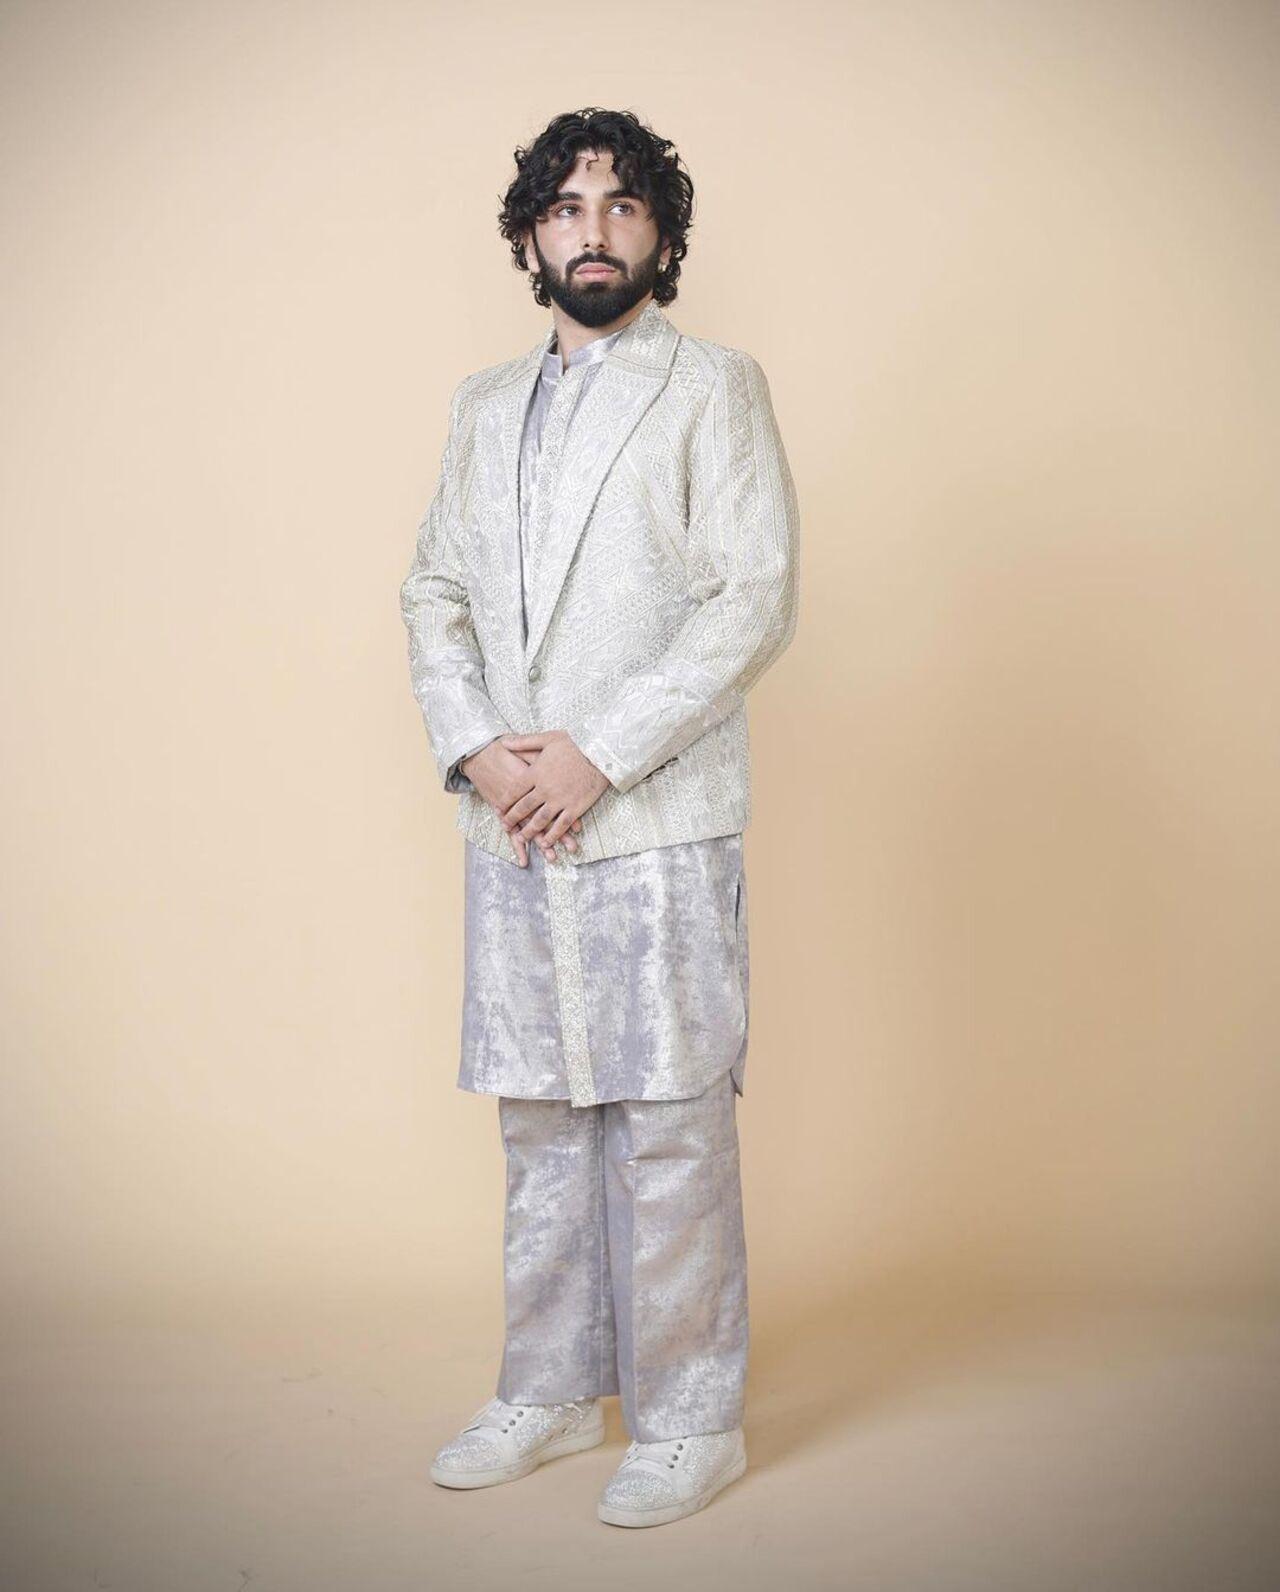 Orry looks stunning in this white sherwani, sporting curly hair that cannot help but remind us of Raj from Big Bang Theory